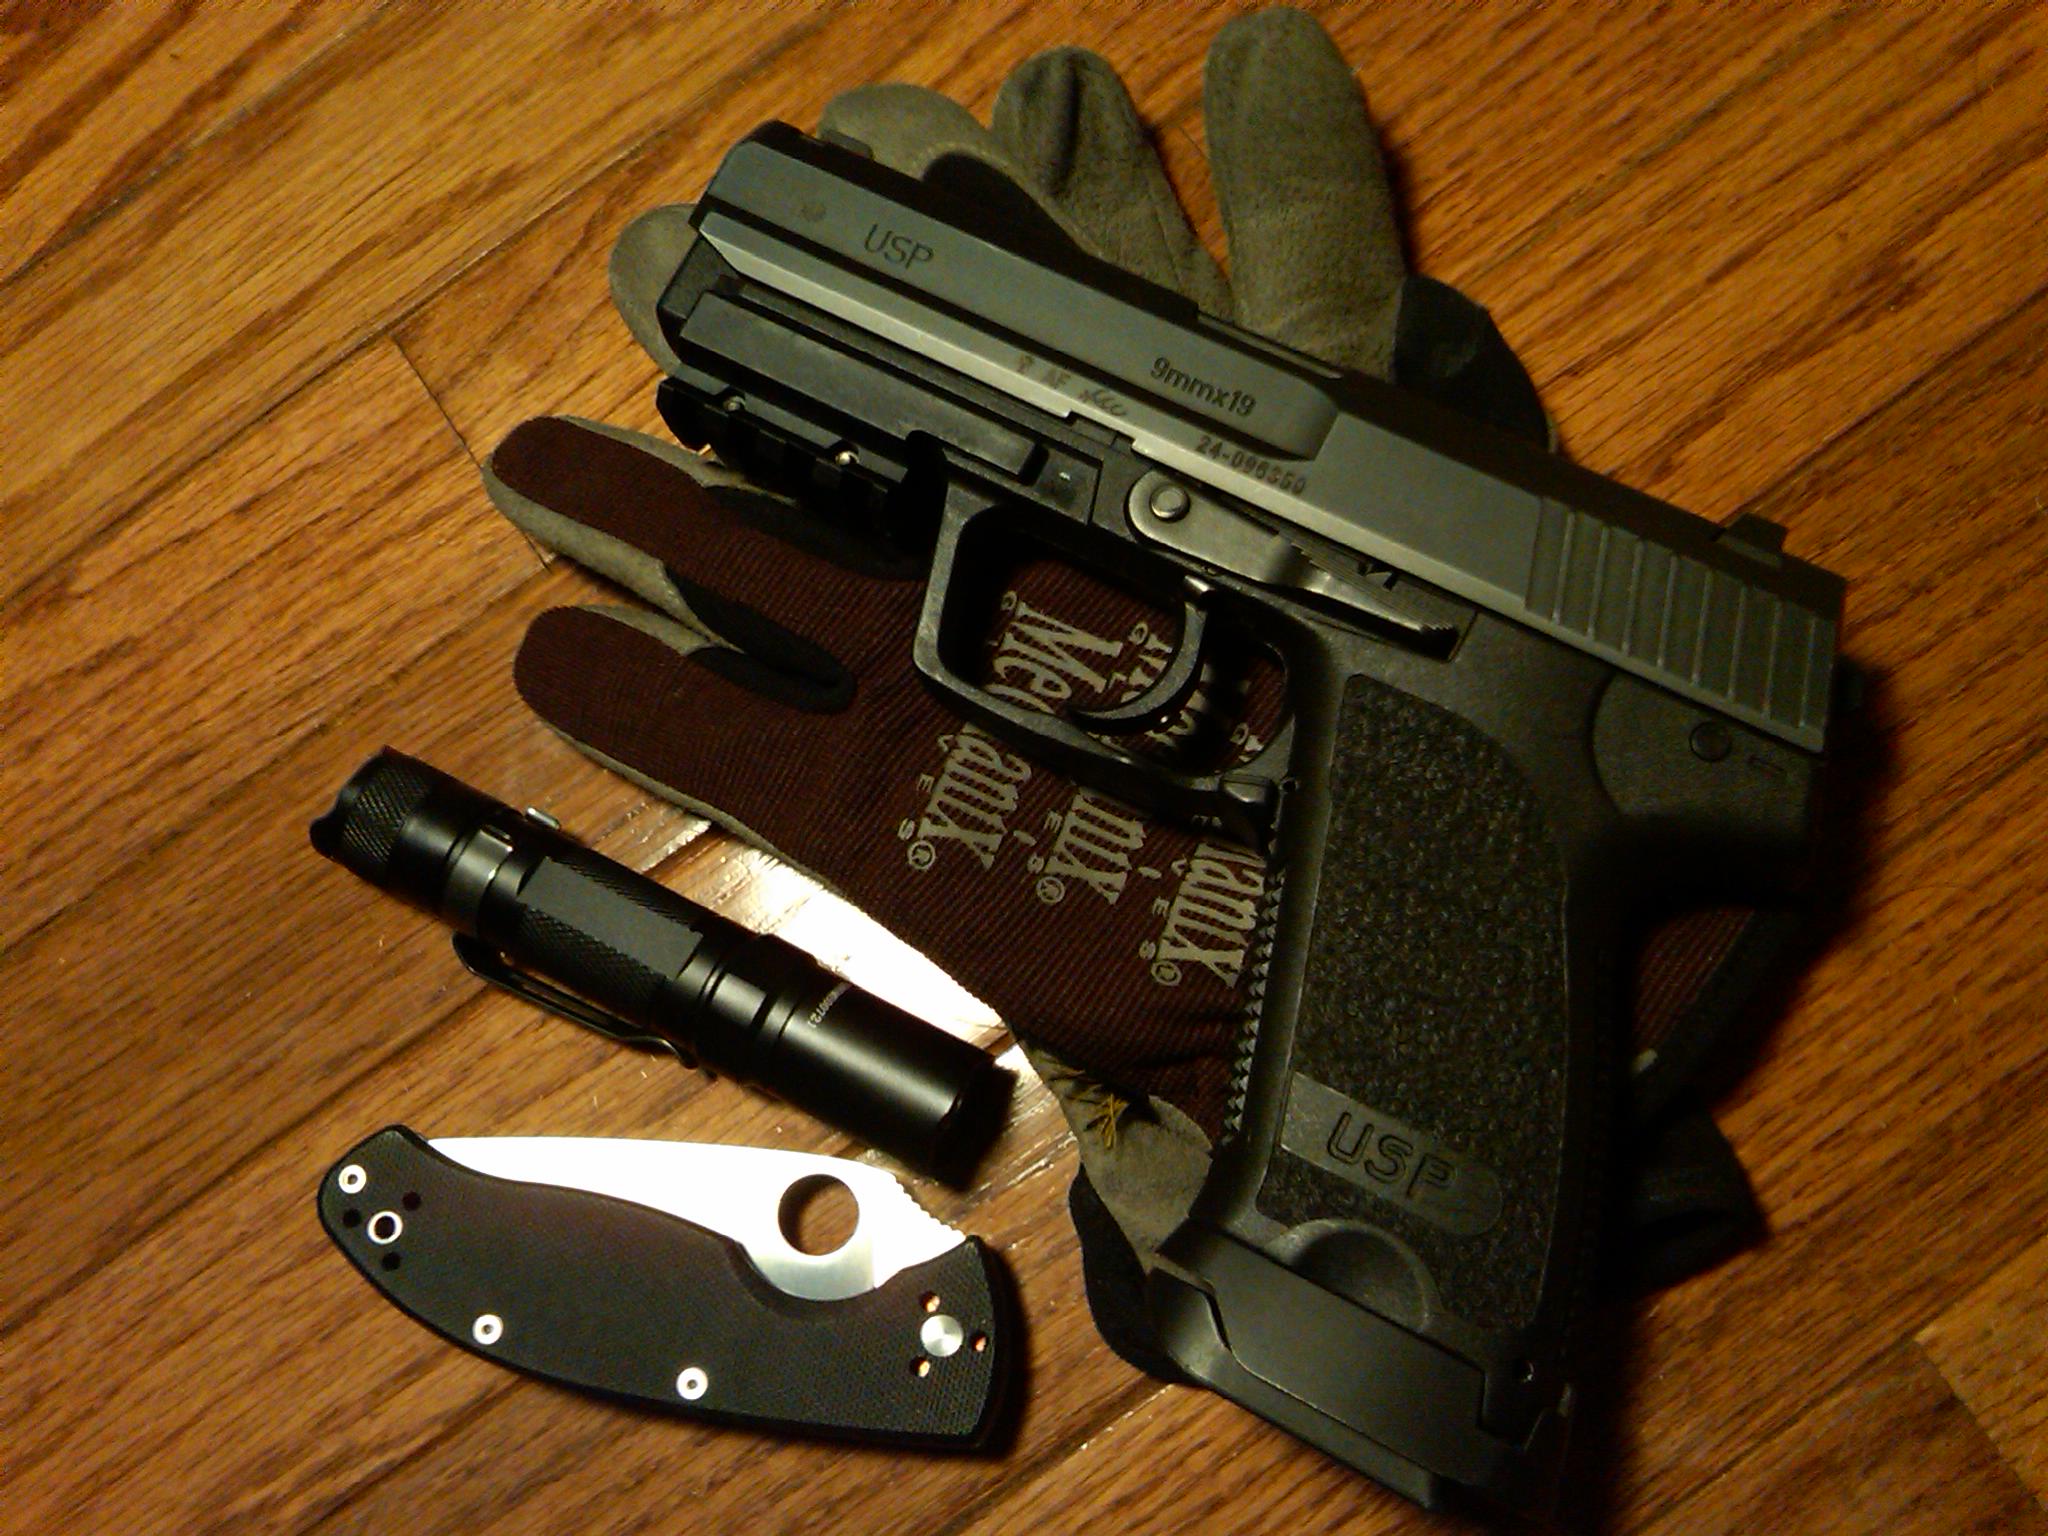 Guns Gloves Weapons Knives Heckler And Koch Usp 45acp